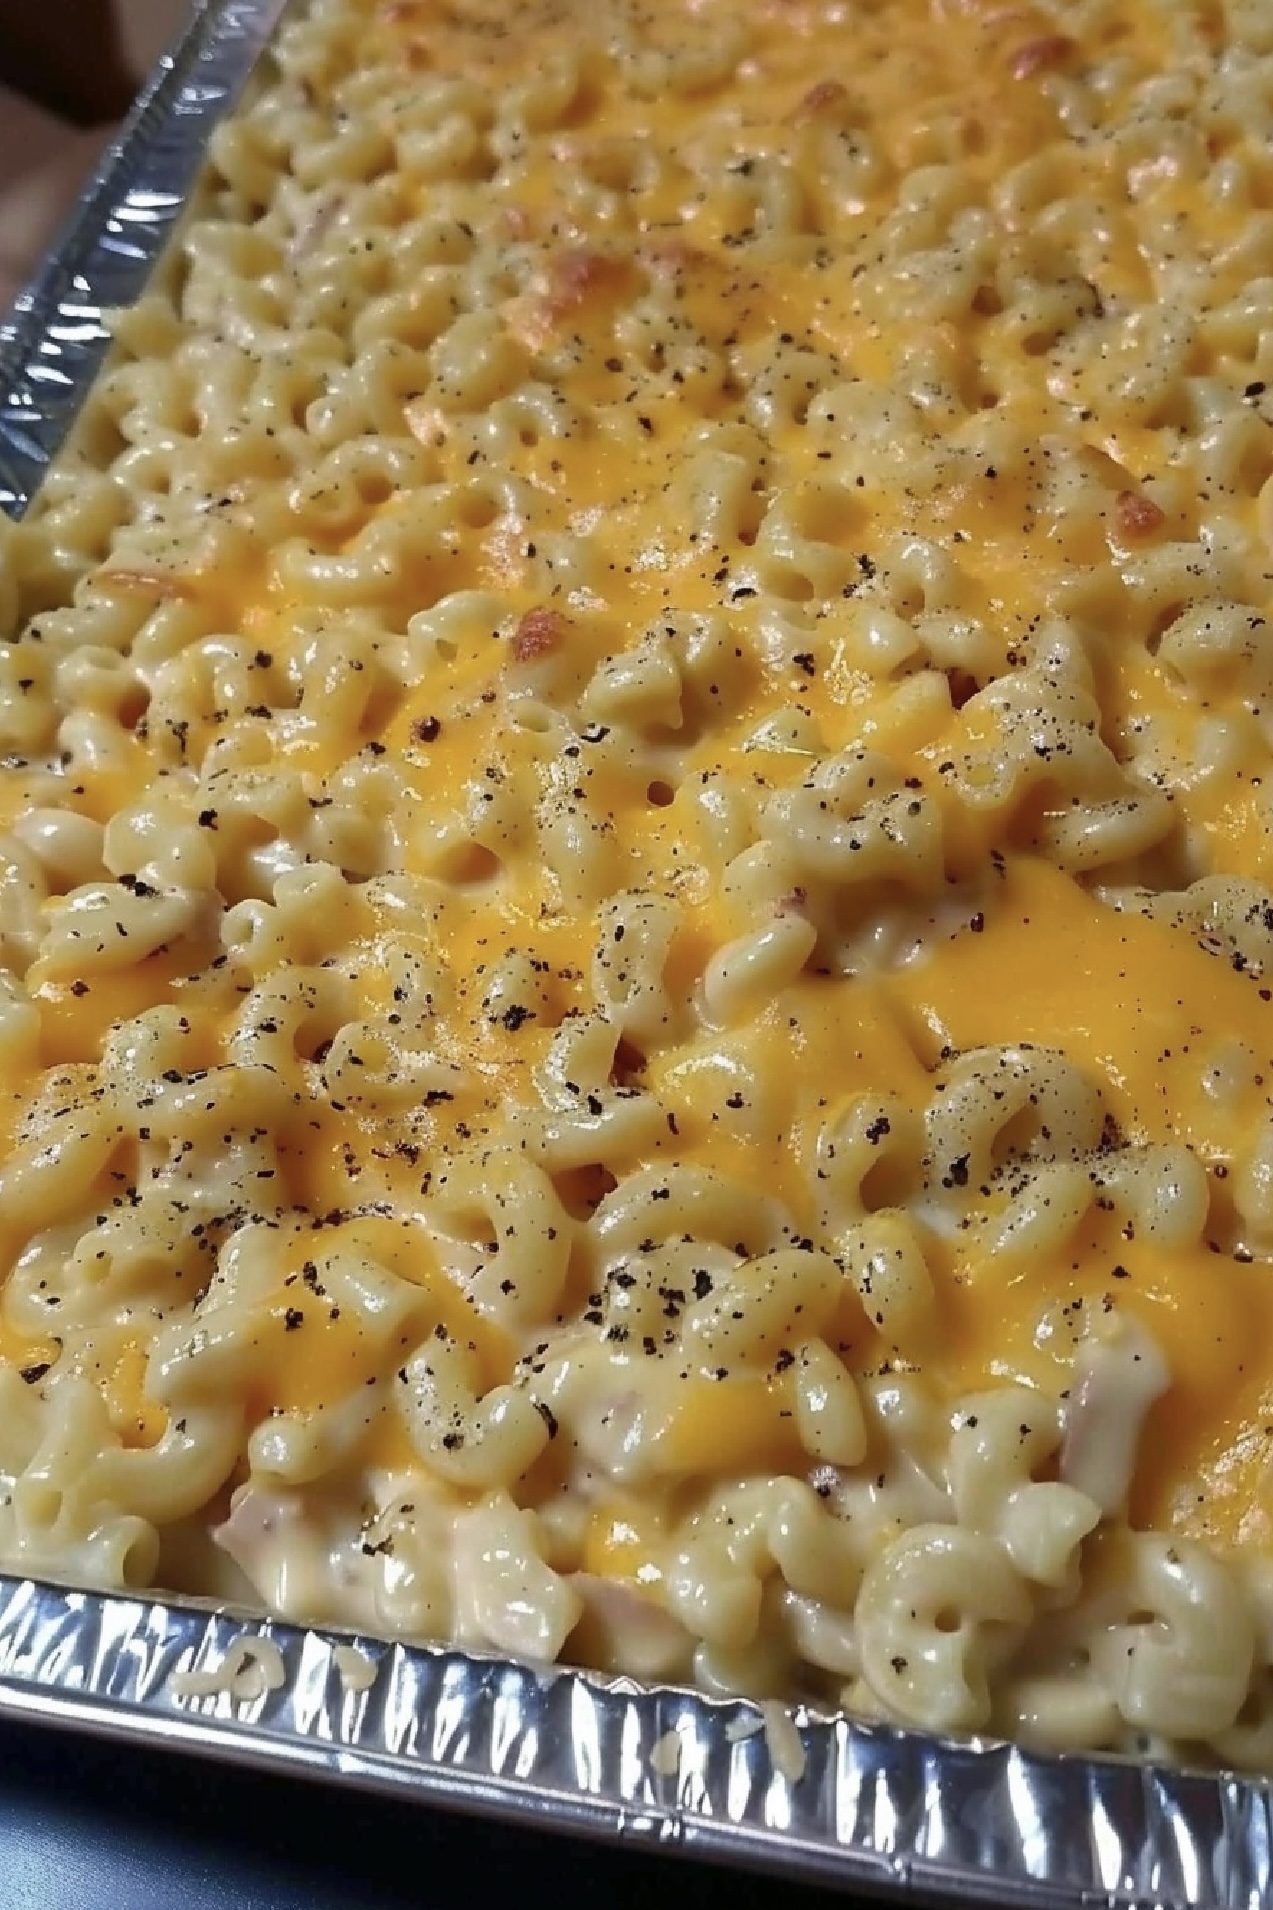 Need a quick and satisfying meal? This Mac n Cheese recipe is your answer to a delicious, comforting dinner in just 40 minutes!